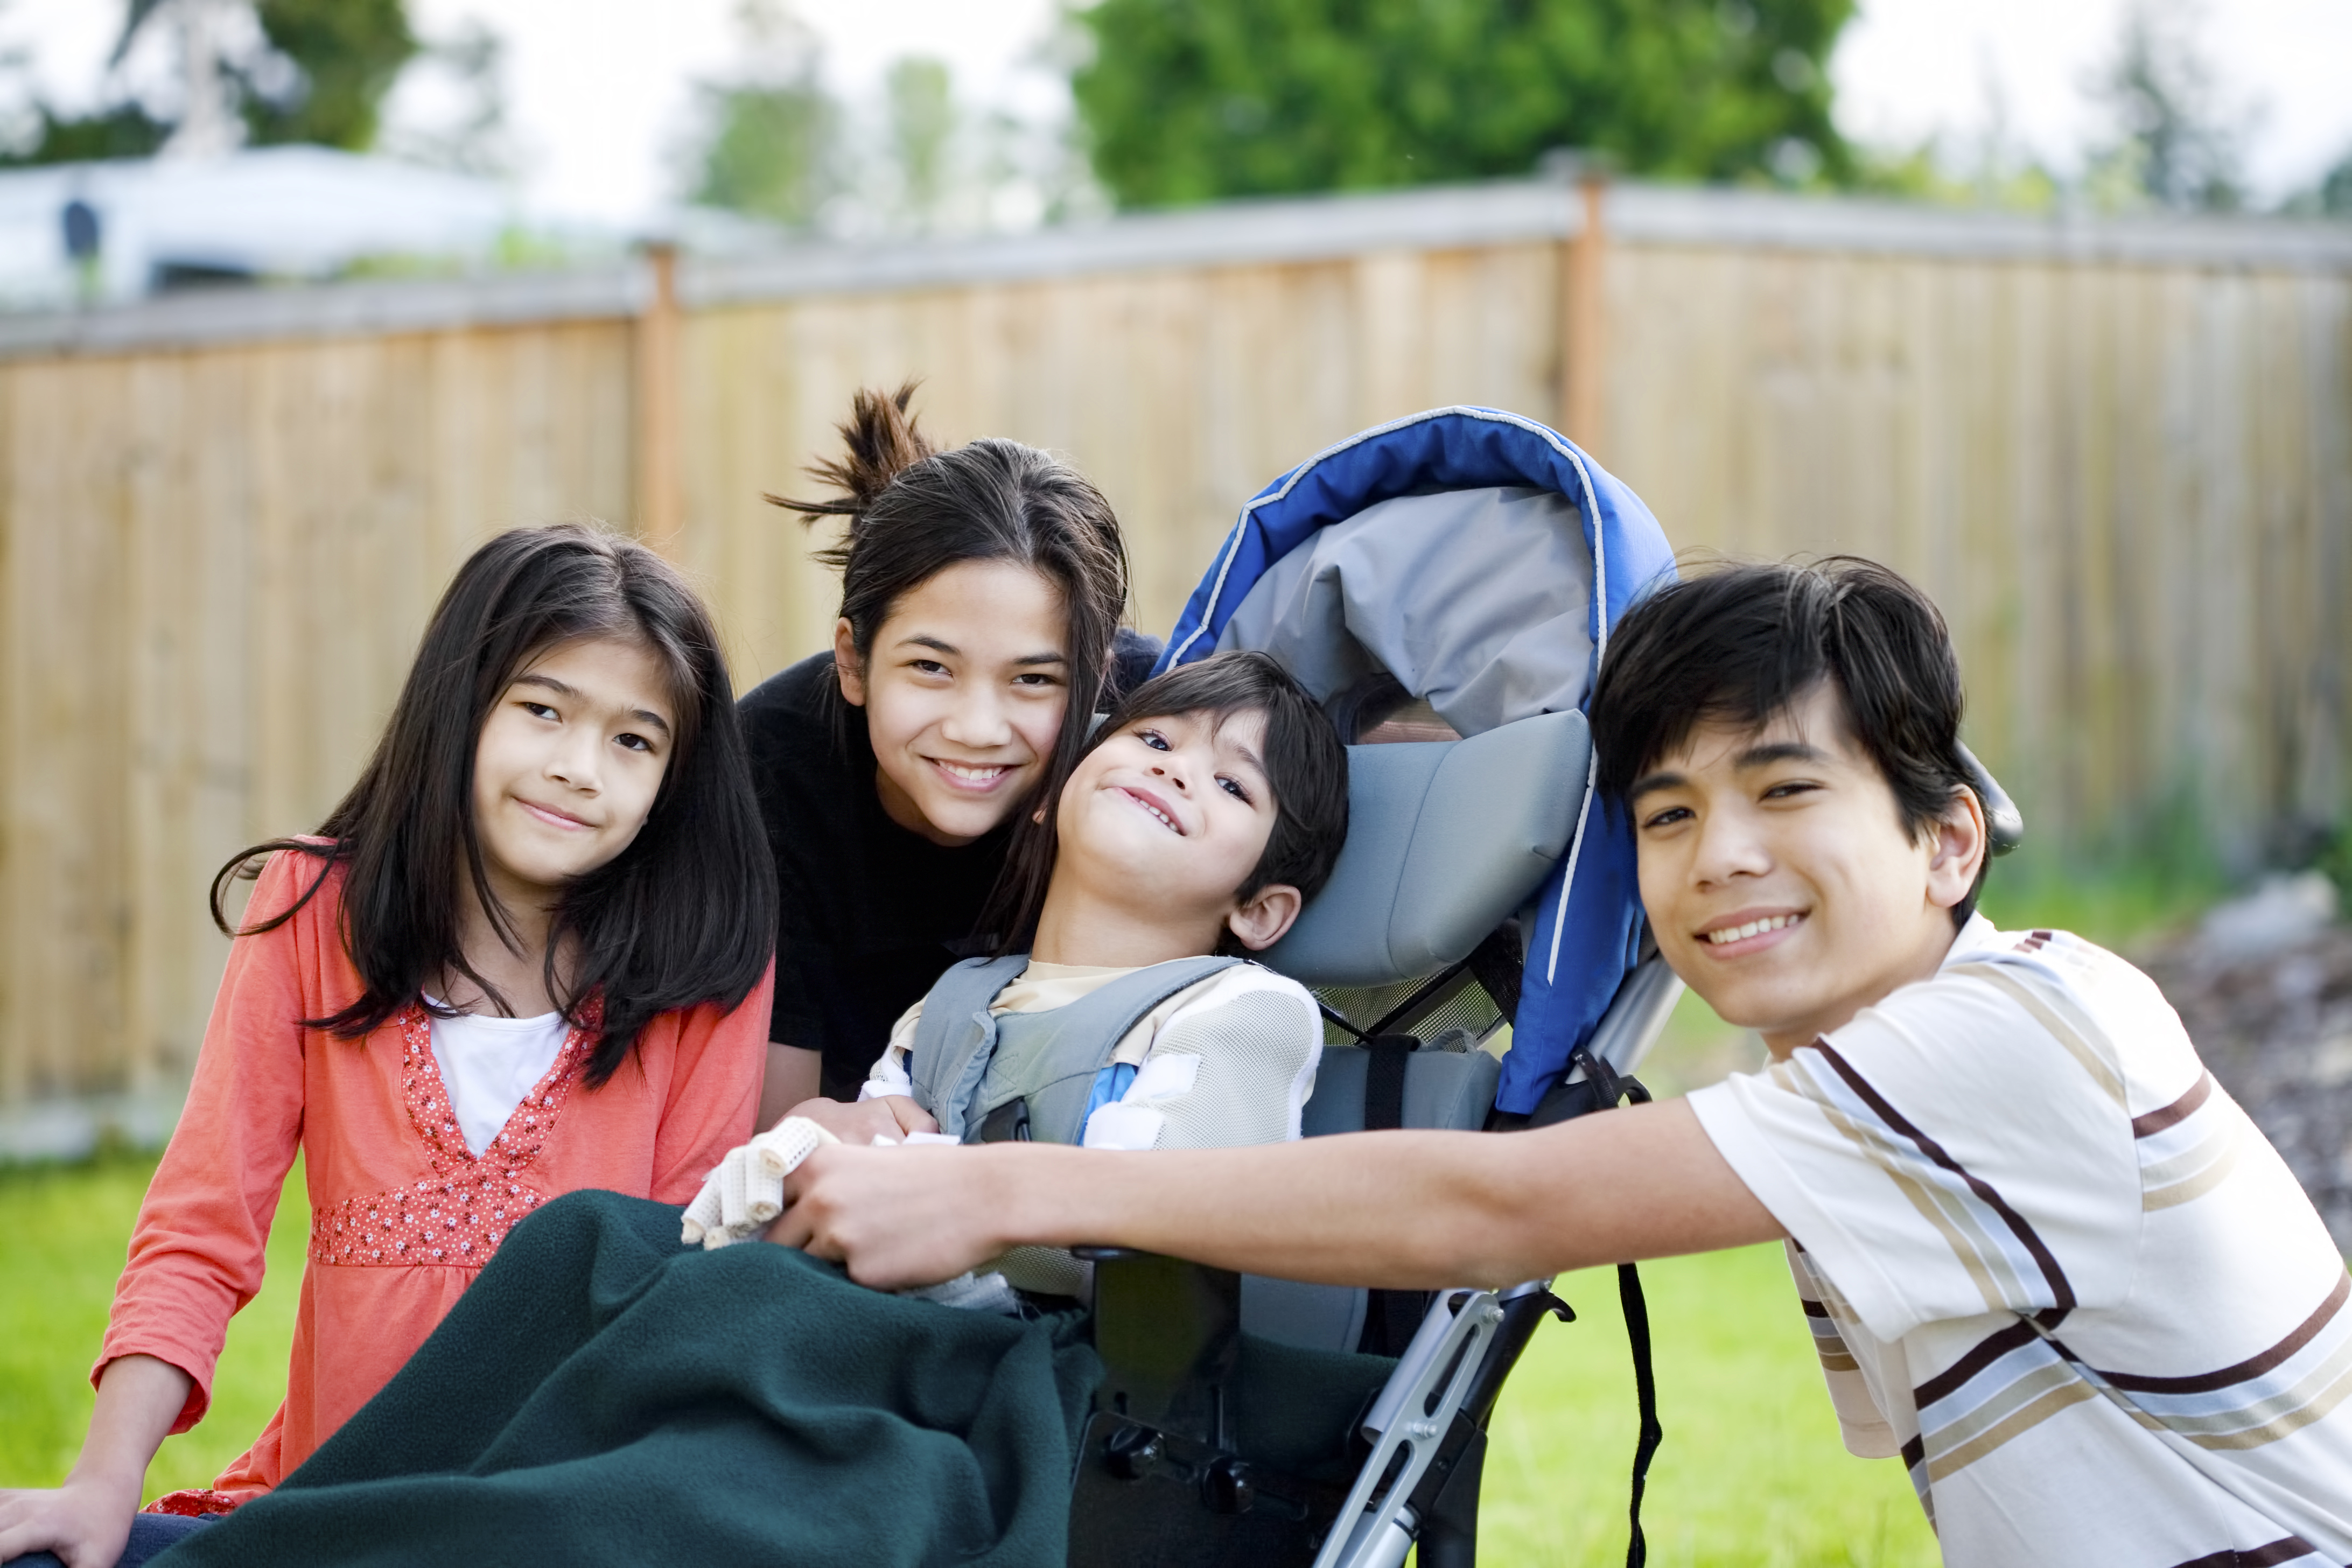 A stock photo showing a group of young caregivers with a young boy with disabilities in a pram.